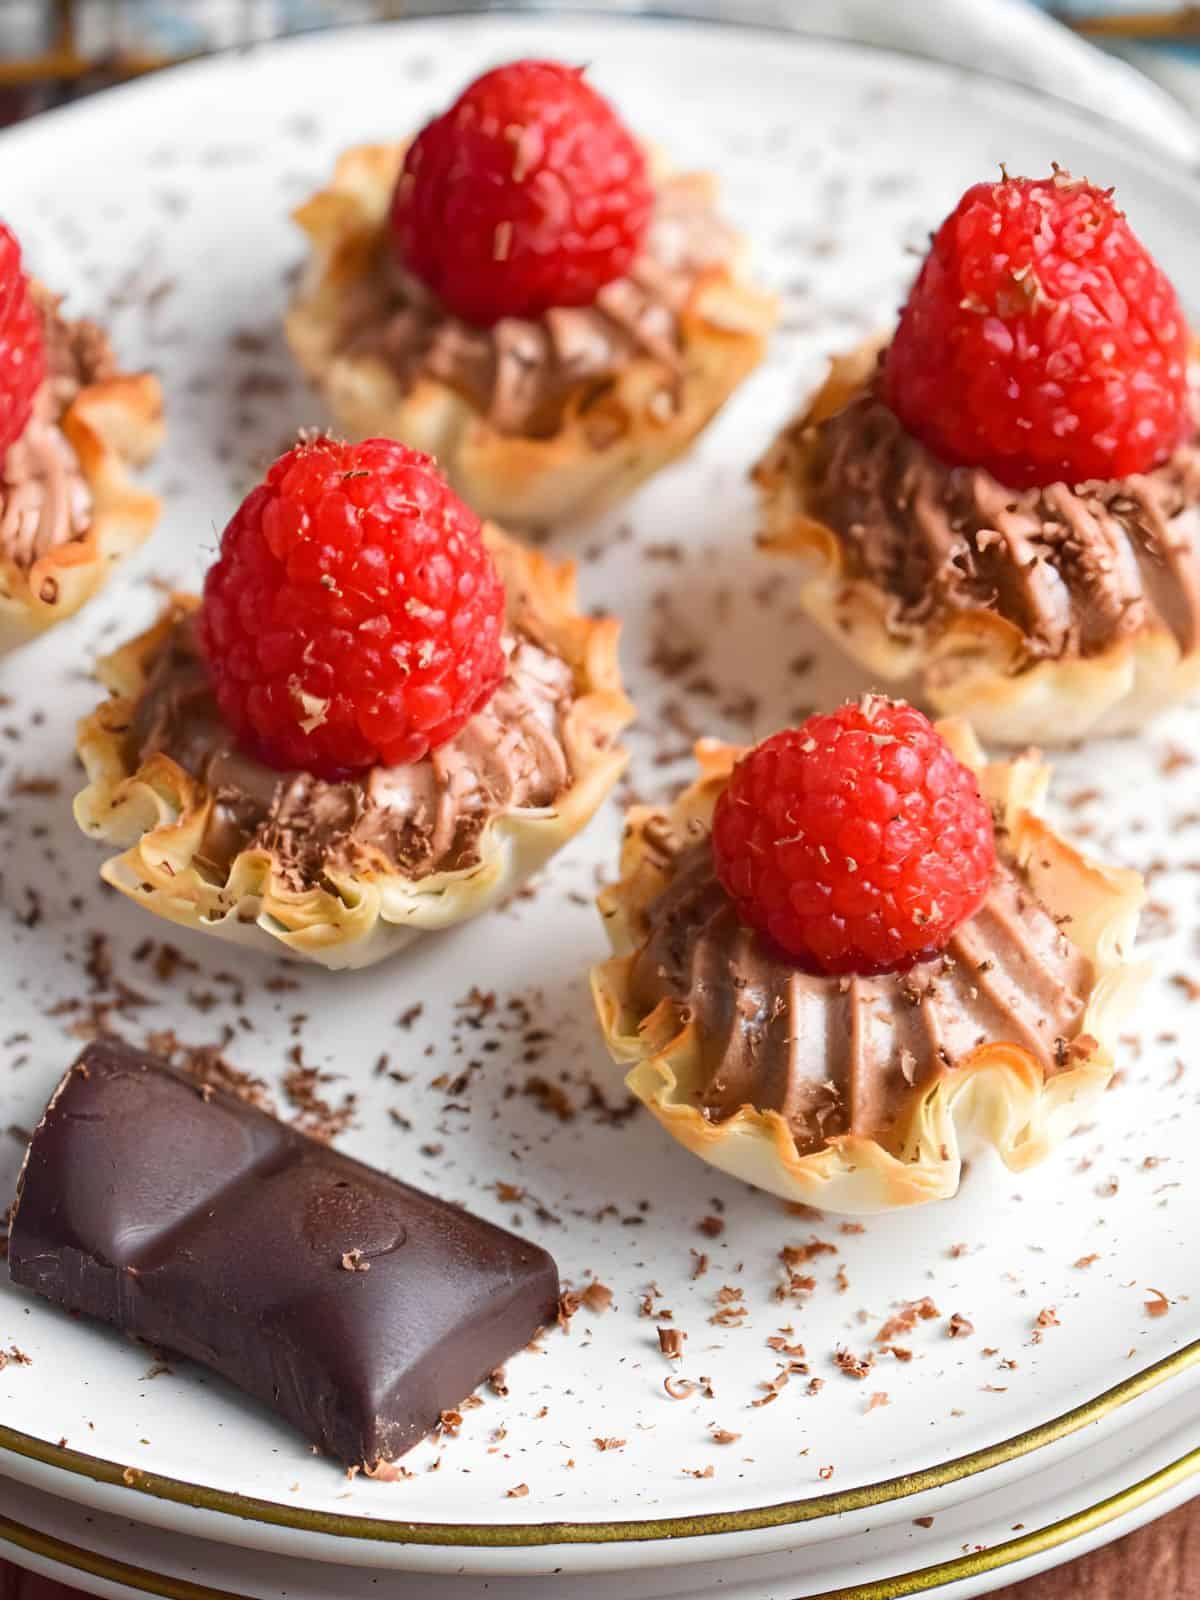 one-bite Nutella tartlets topped with fresh raspberries and grated dark chocolate.